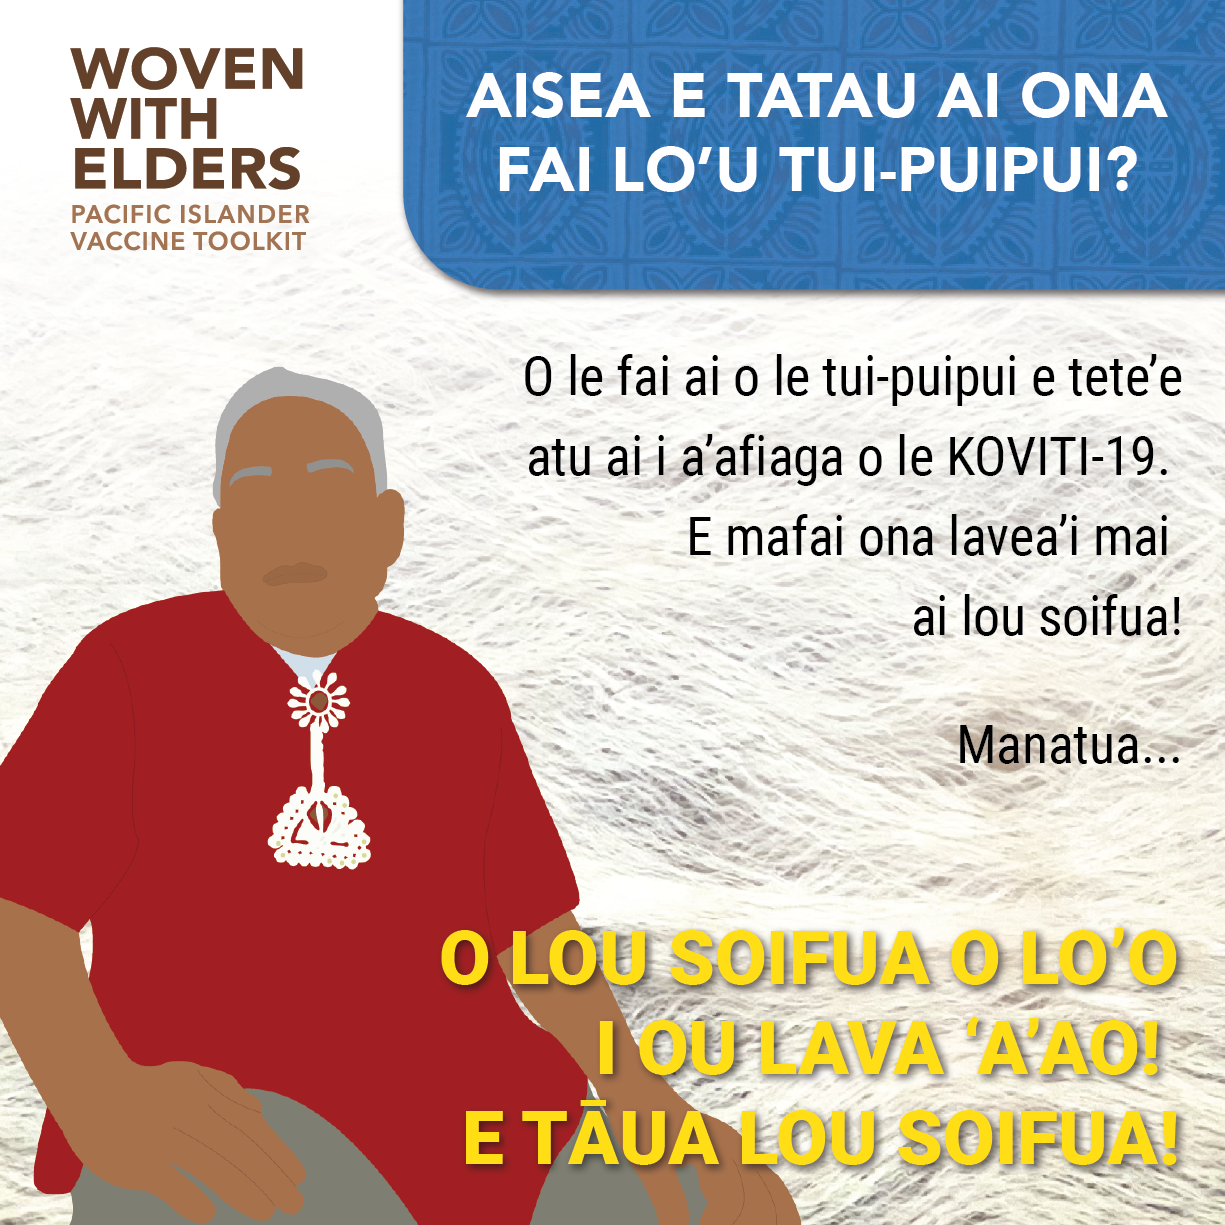 Cartoon image of an elder Pacific Islander man. Text reads, "Why should I get a vaccine? Getting the vaccine can prevent you from becoming seriously ill from COVID-19. It can potentially save your life! Remember...you are worth protecting!"